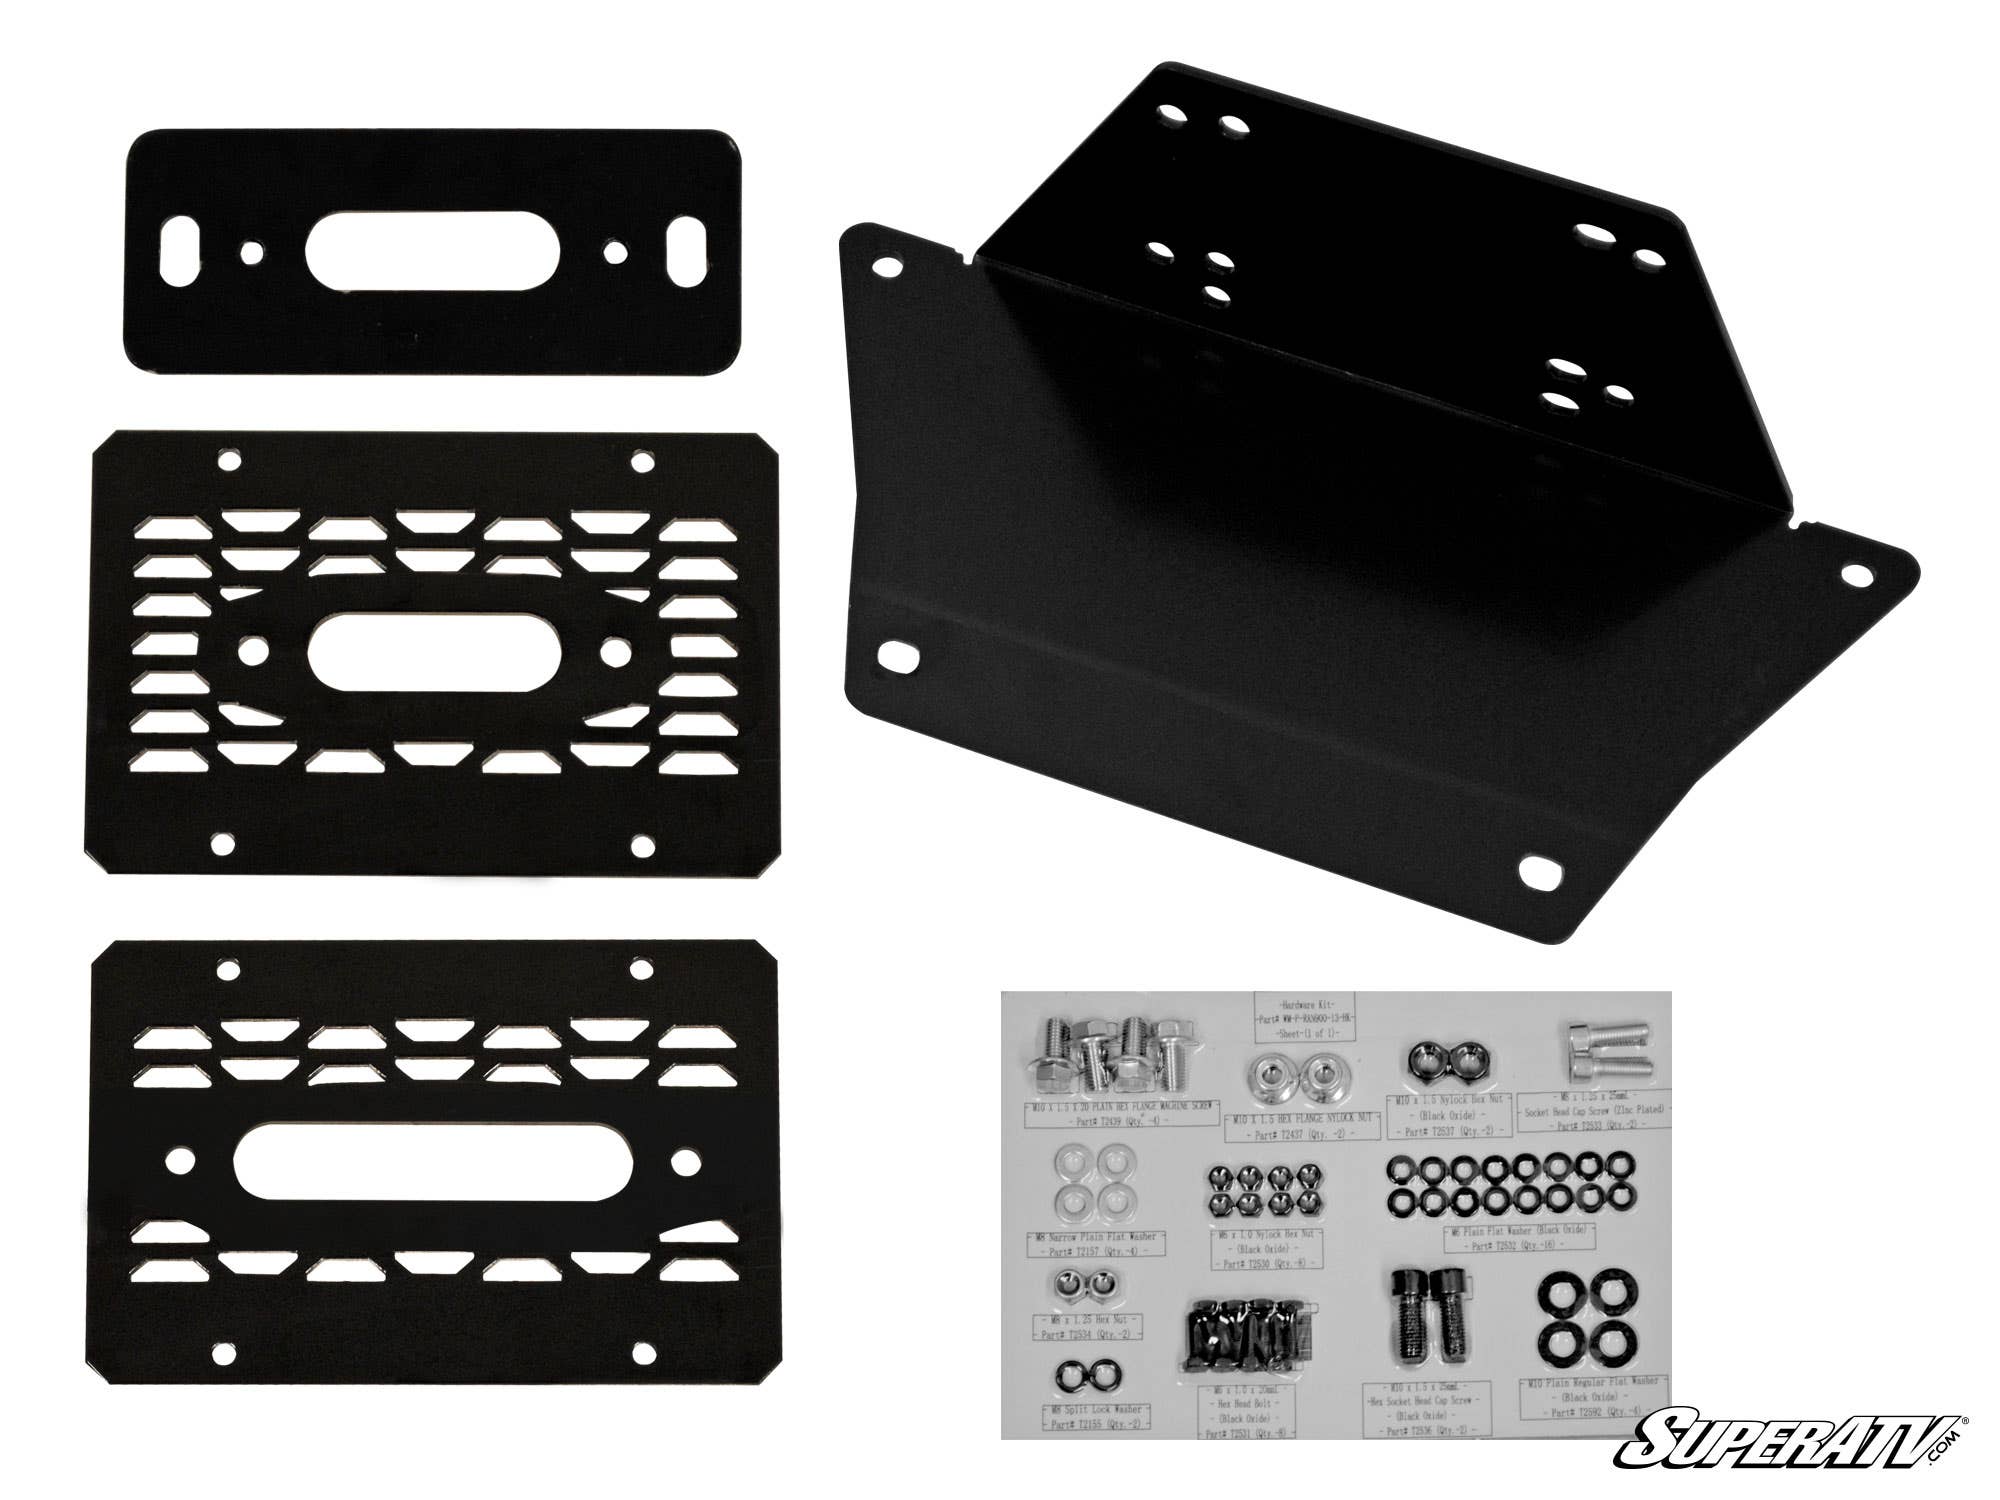 Ranger XP Kinetic Winch Mounting Plate